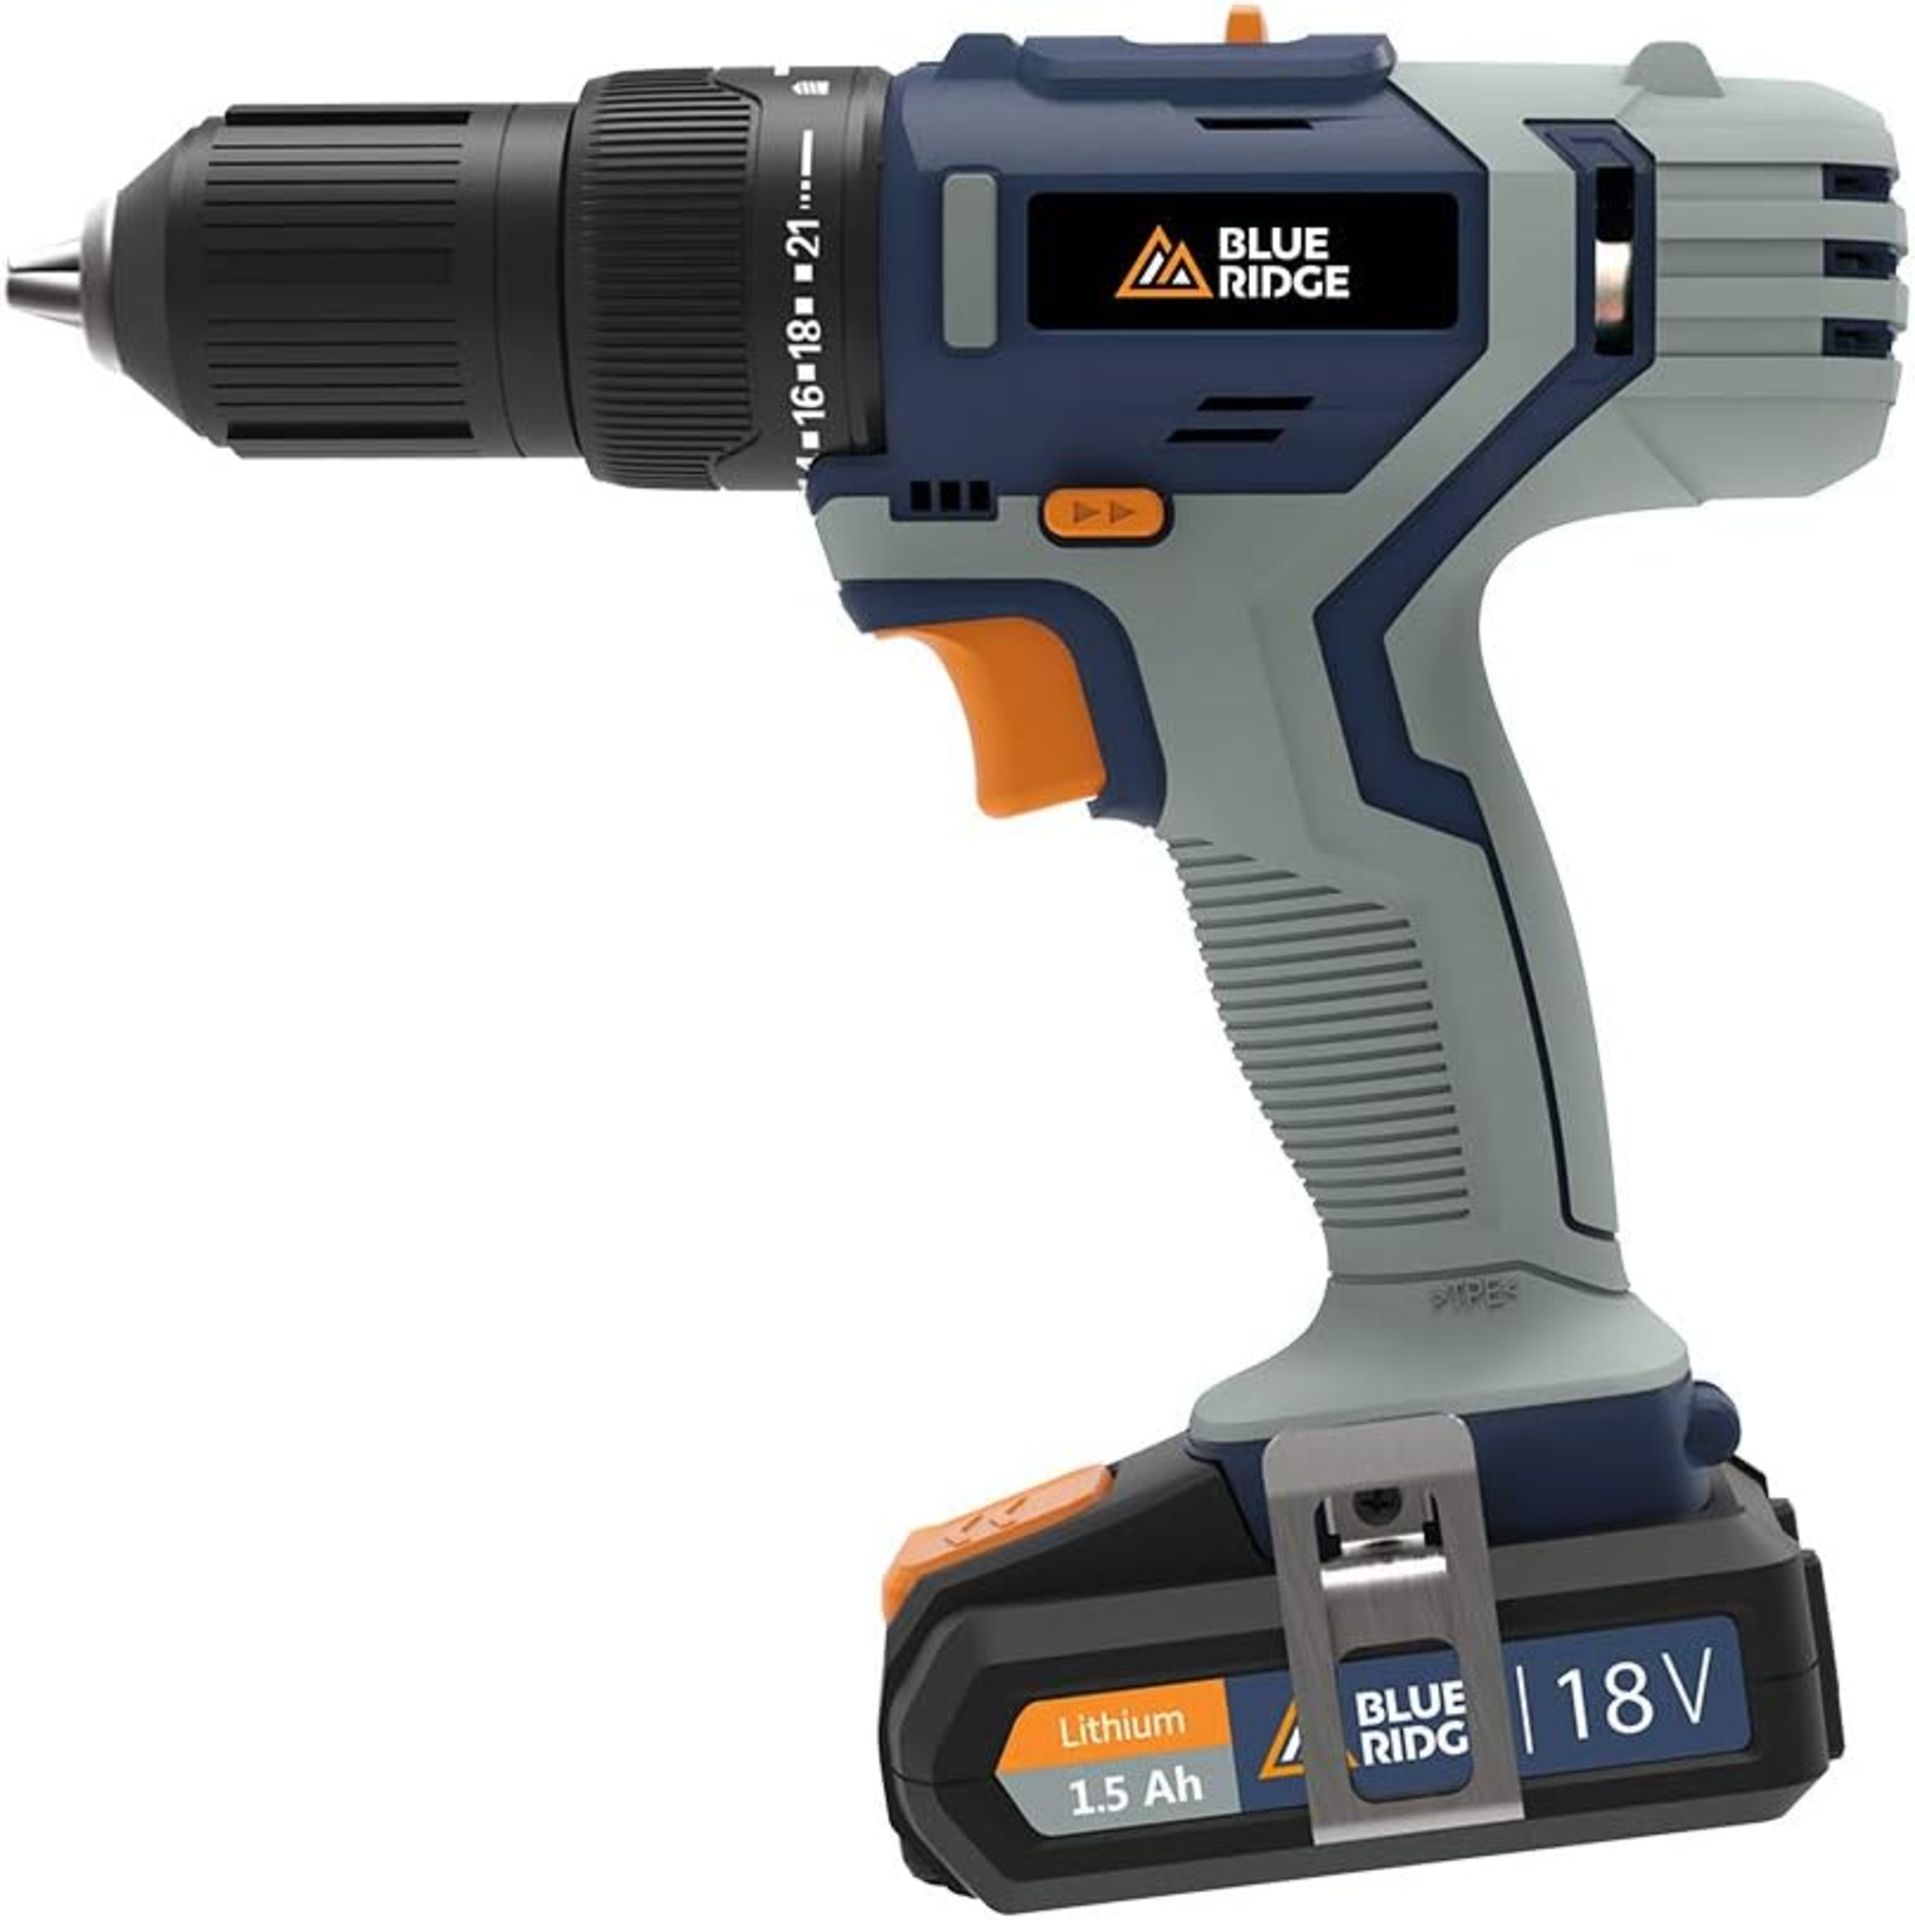 2x NEW & BOXED BLUE RIDGE 18V Cordless Hammer Drill with 2 x 1.5 Ah Li-ion Batteries & 43 Piece - Image 2 of 11